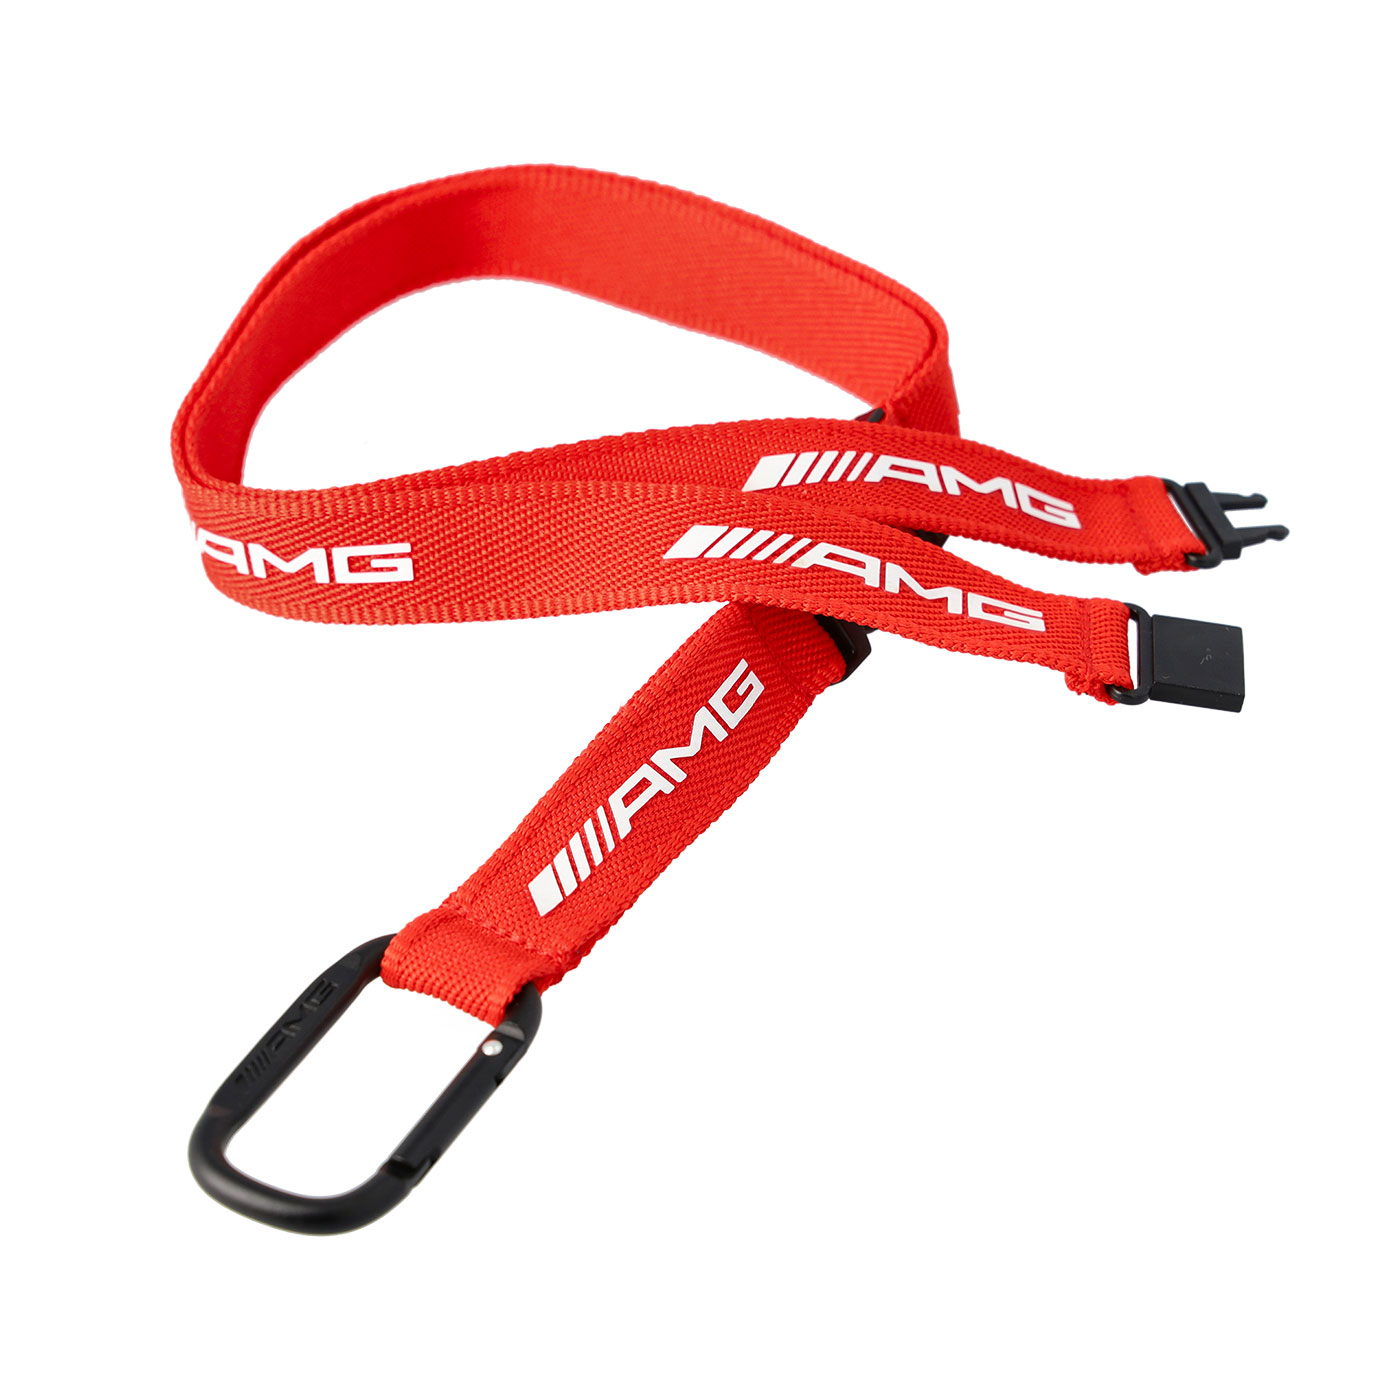 AMG lanyard  Mercedes-Benz Lifestyle Collection